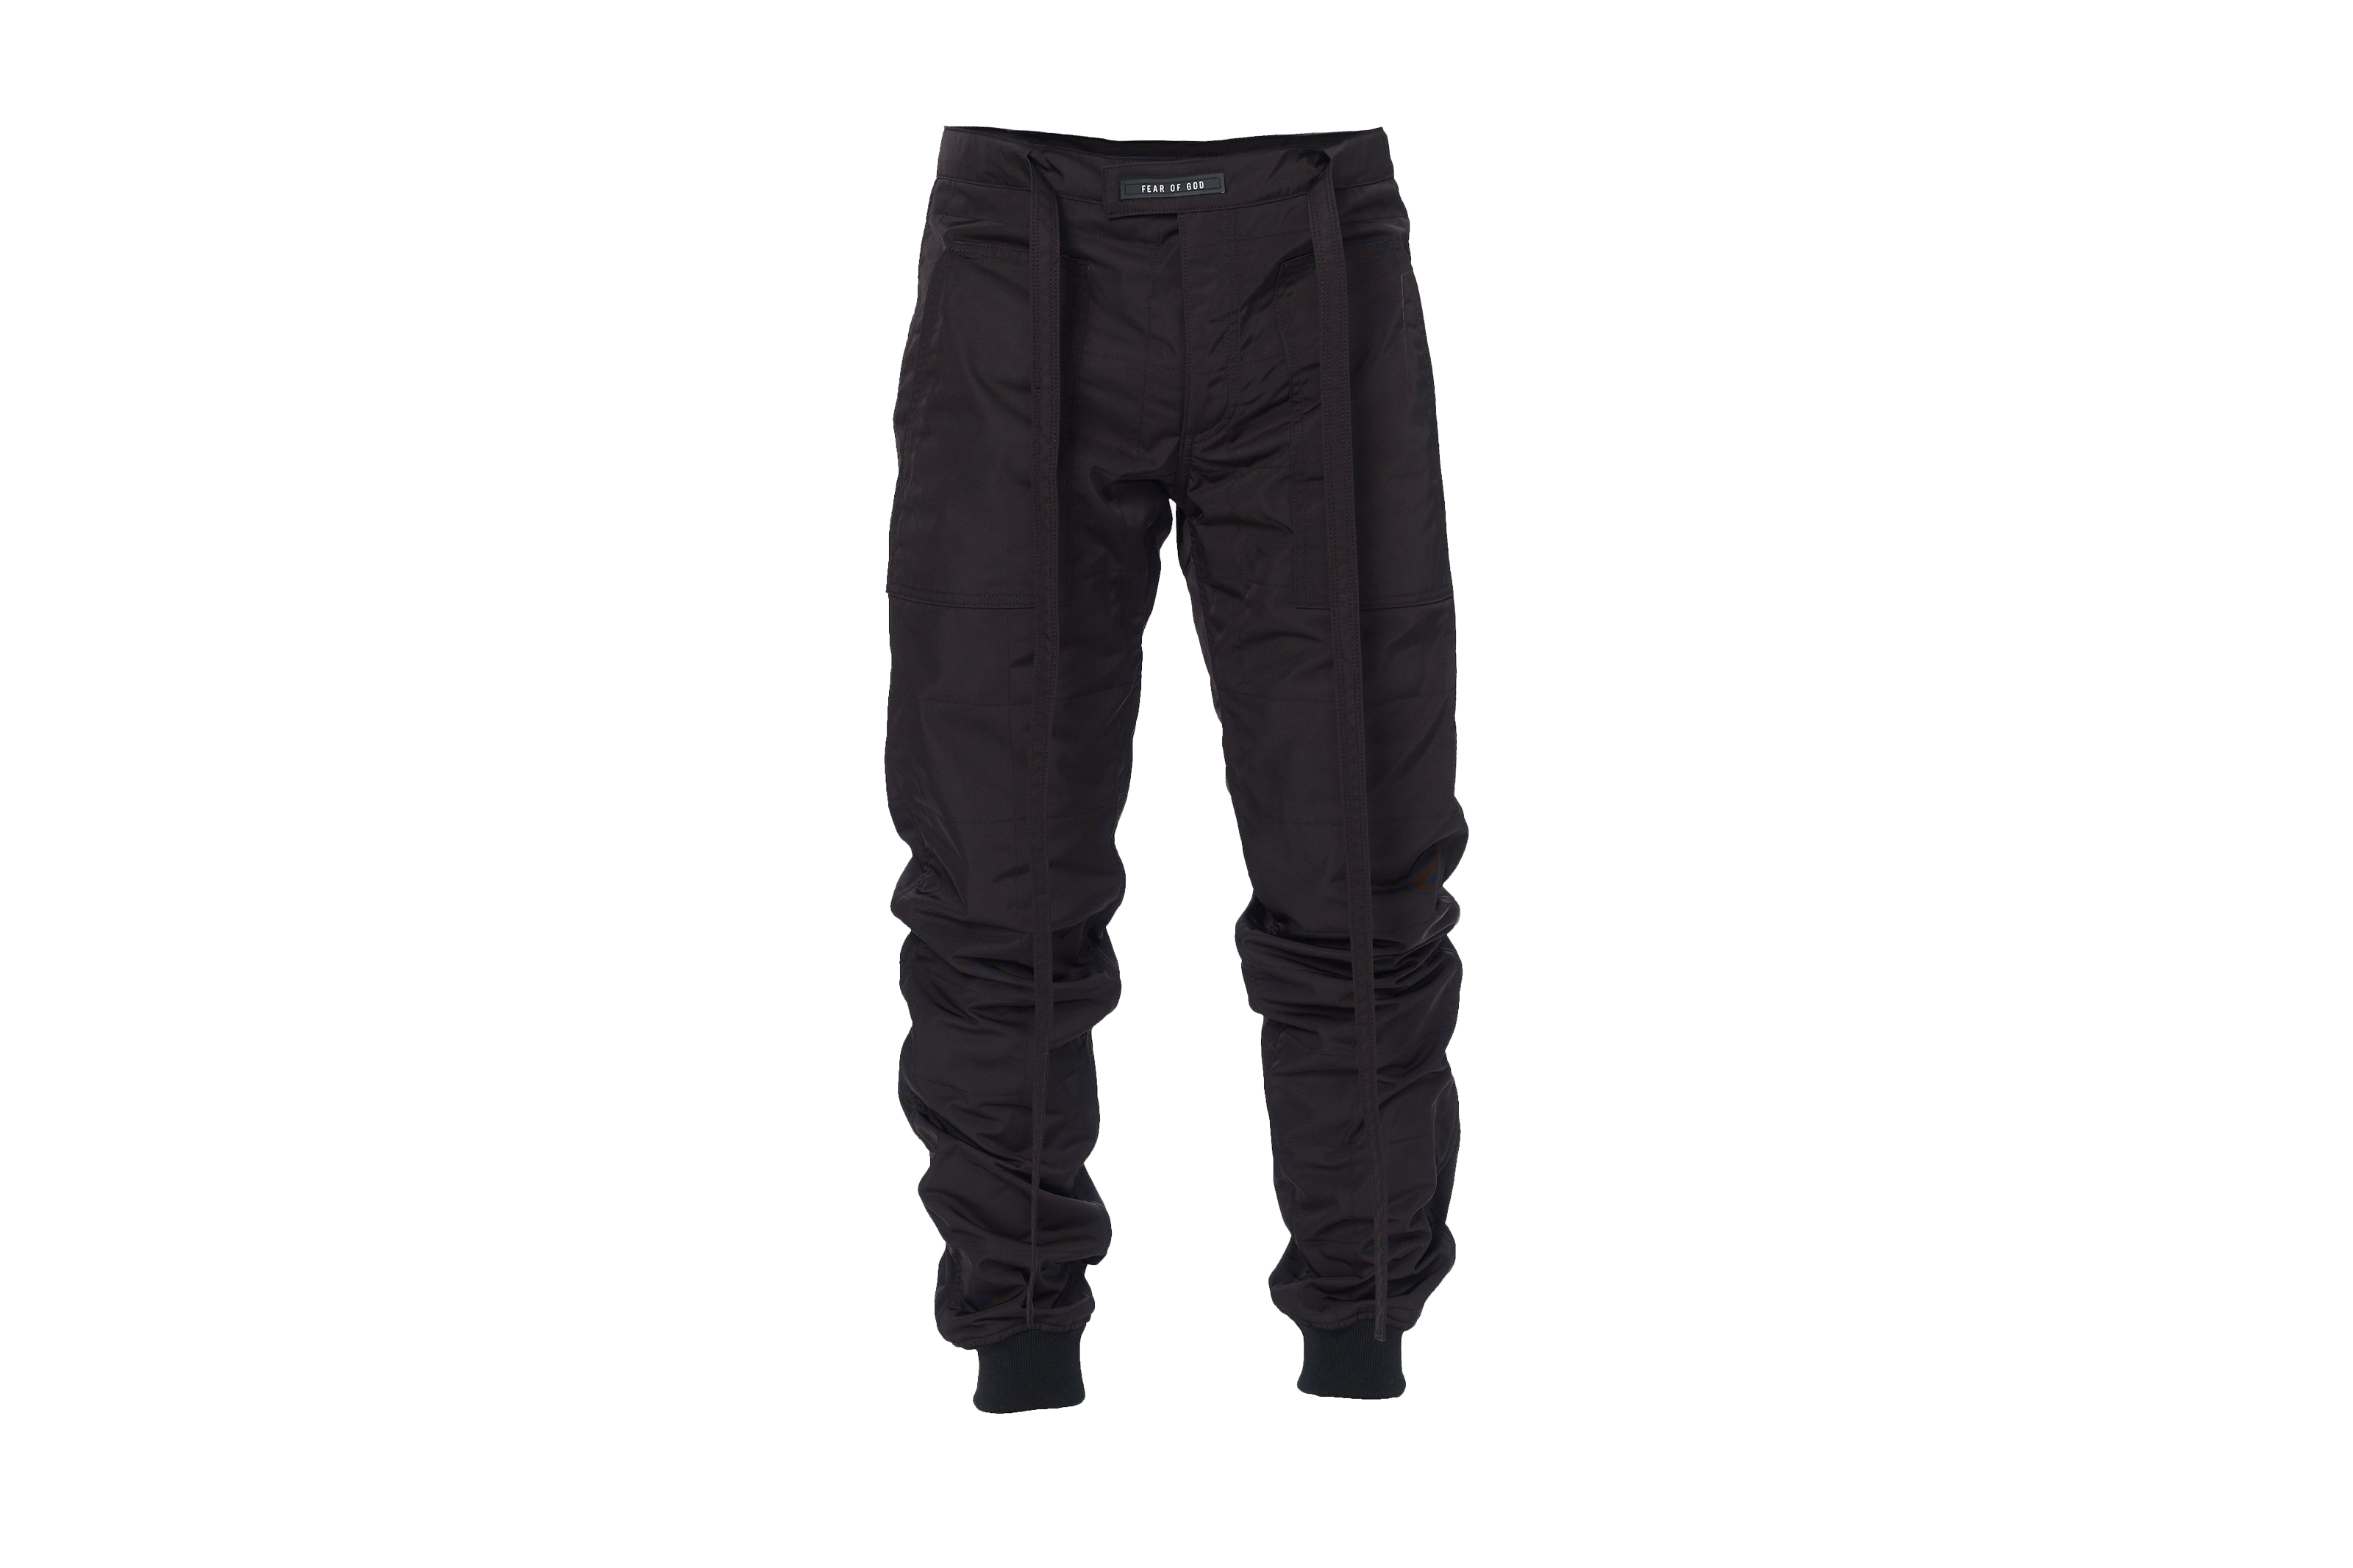 FEAR OF GOD Nylon Quilted Pants Black - SIXTH COLLECTION - GB